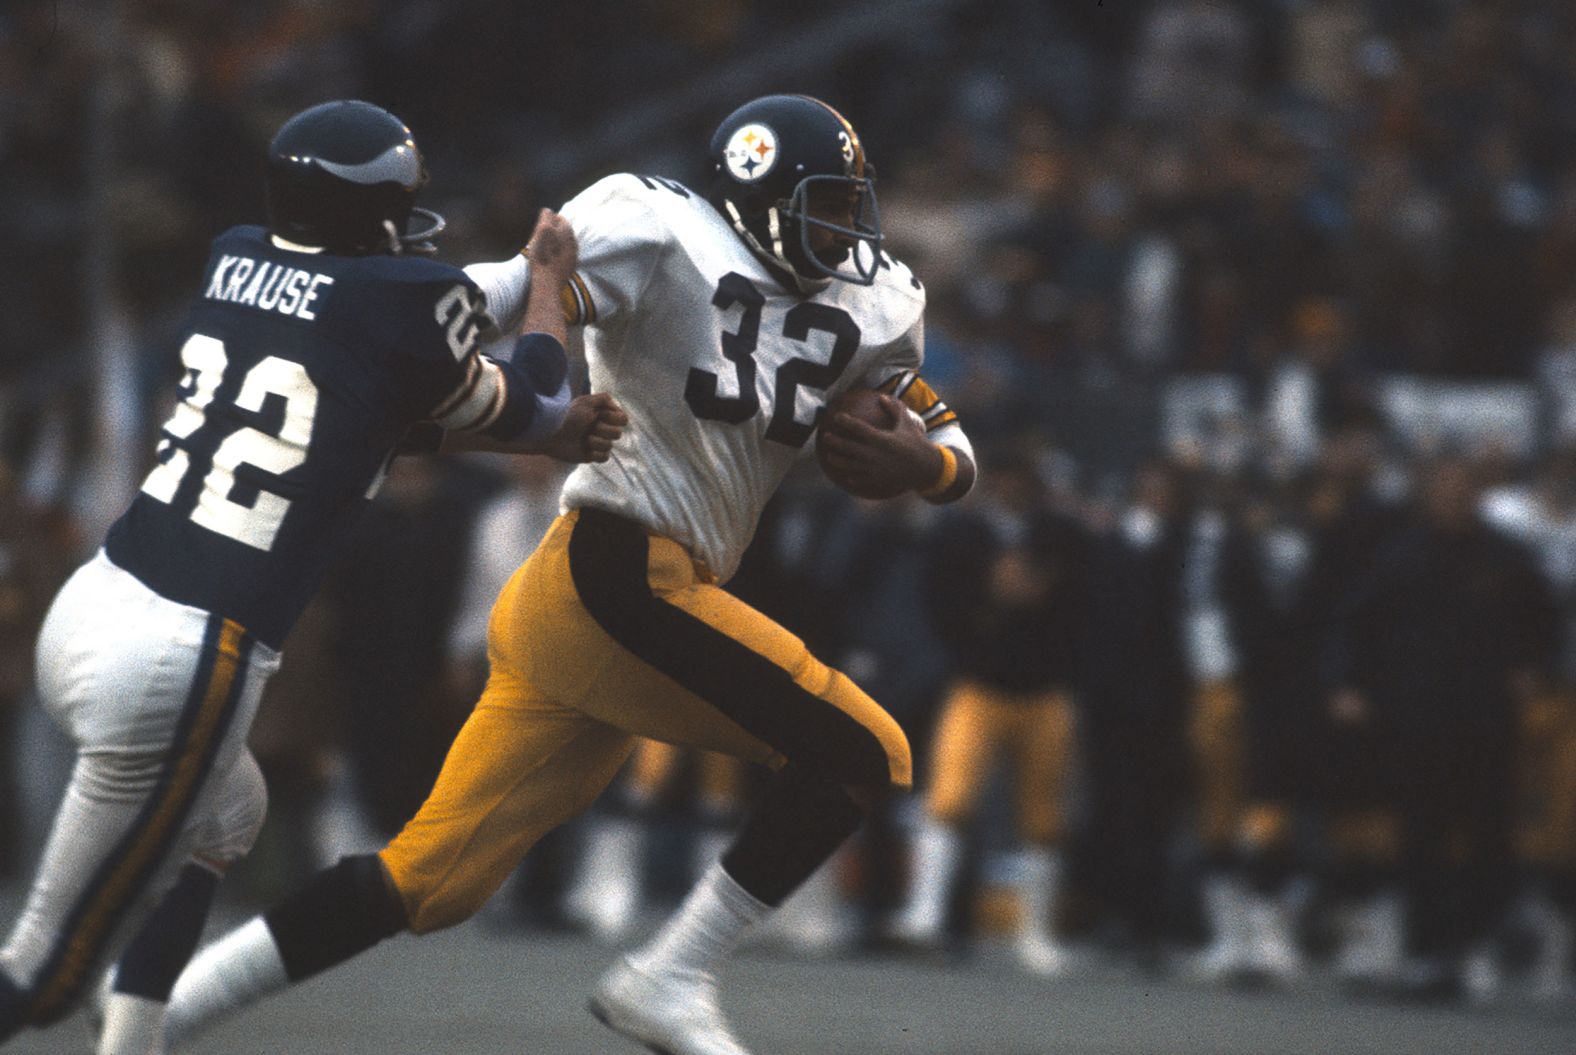 <strong>Super Bowl IX (1975):</strong> Pittsburgh Steelers running back Franco Harris fights off Minnesota defender Paul Krause during Pittsburgh's 16-6 victory in Super Bowl IX. Harris ran for 158 yards and a touchdown on his way to winning MVP.